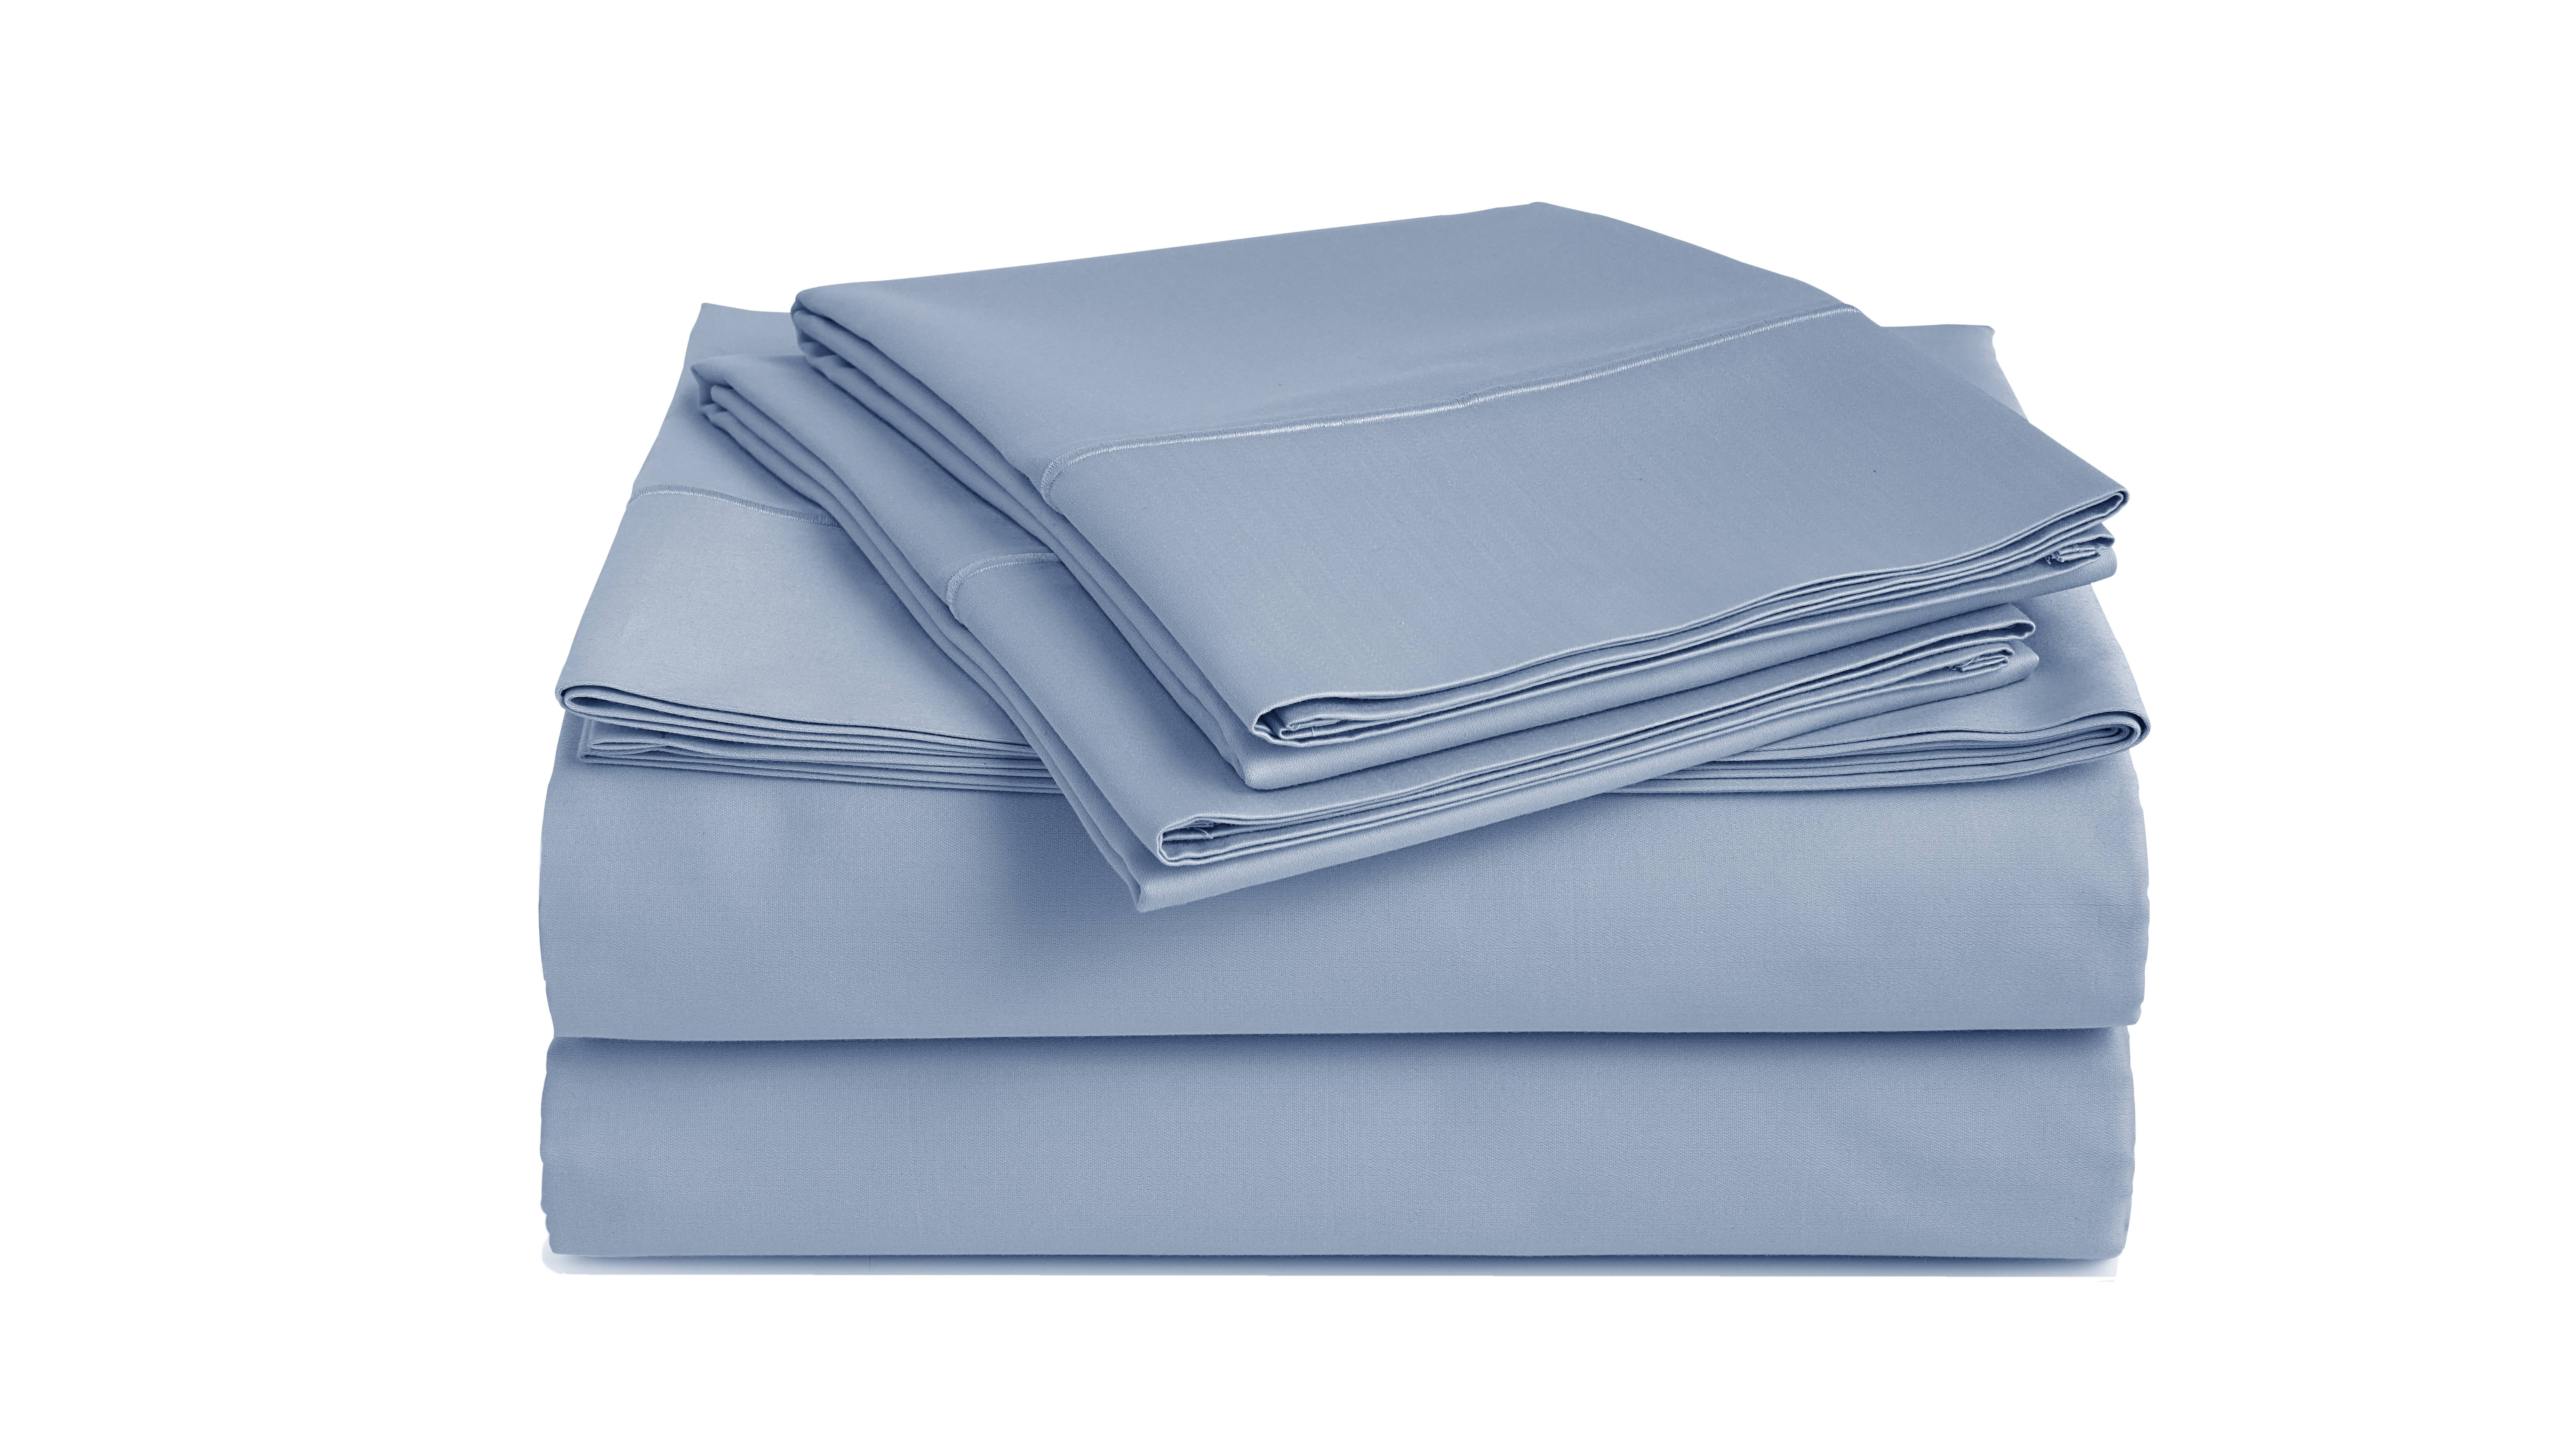 Details about   100% Egyptian Cotton 1 Piece Blue Fitted Sheet 800 Tc Queen/King All Size